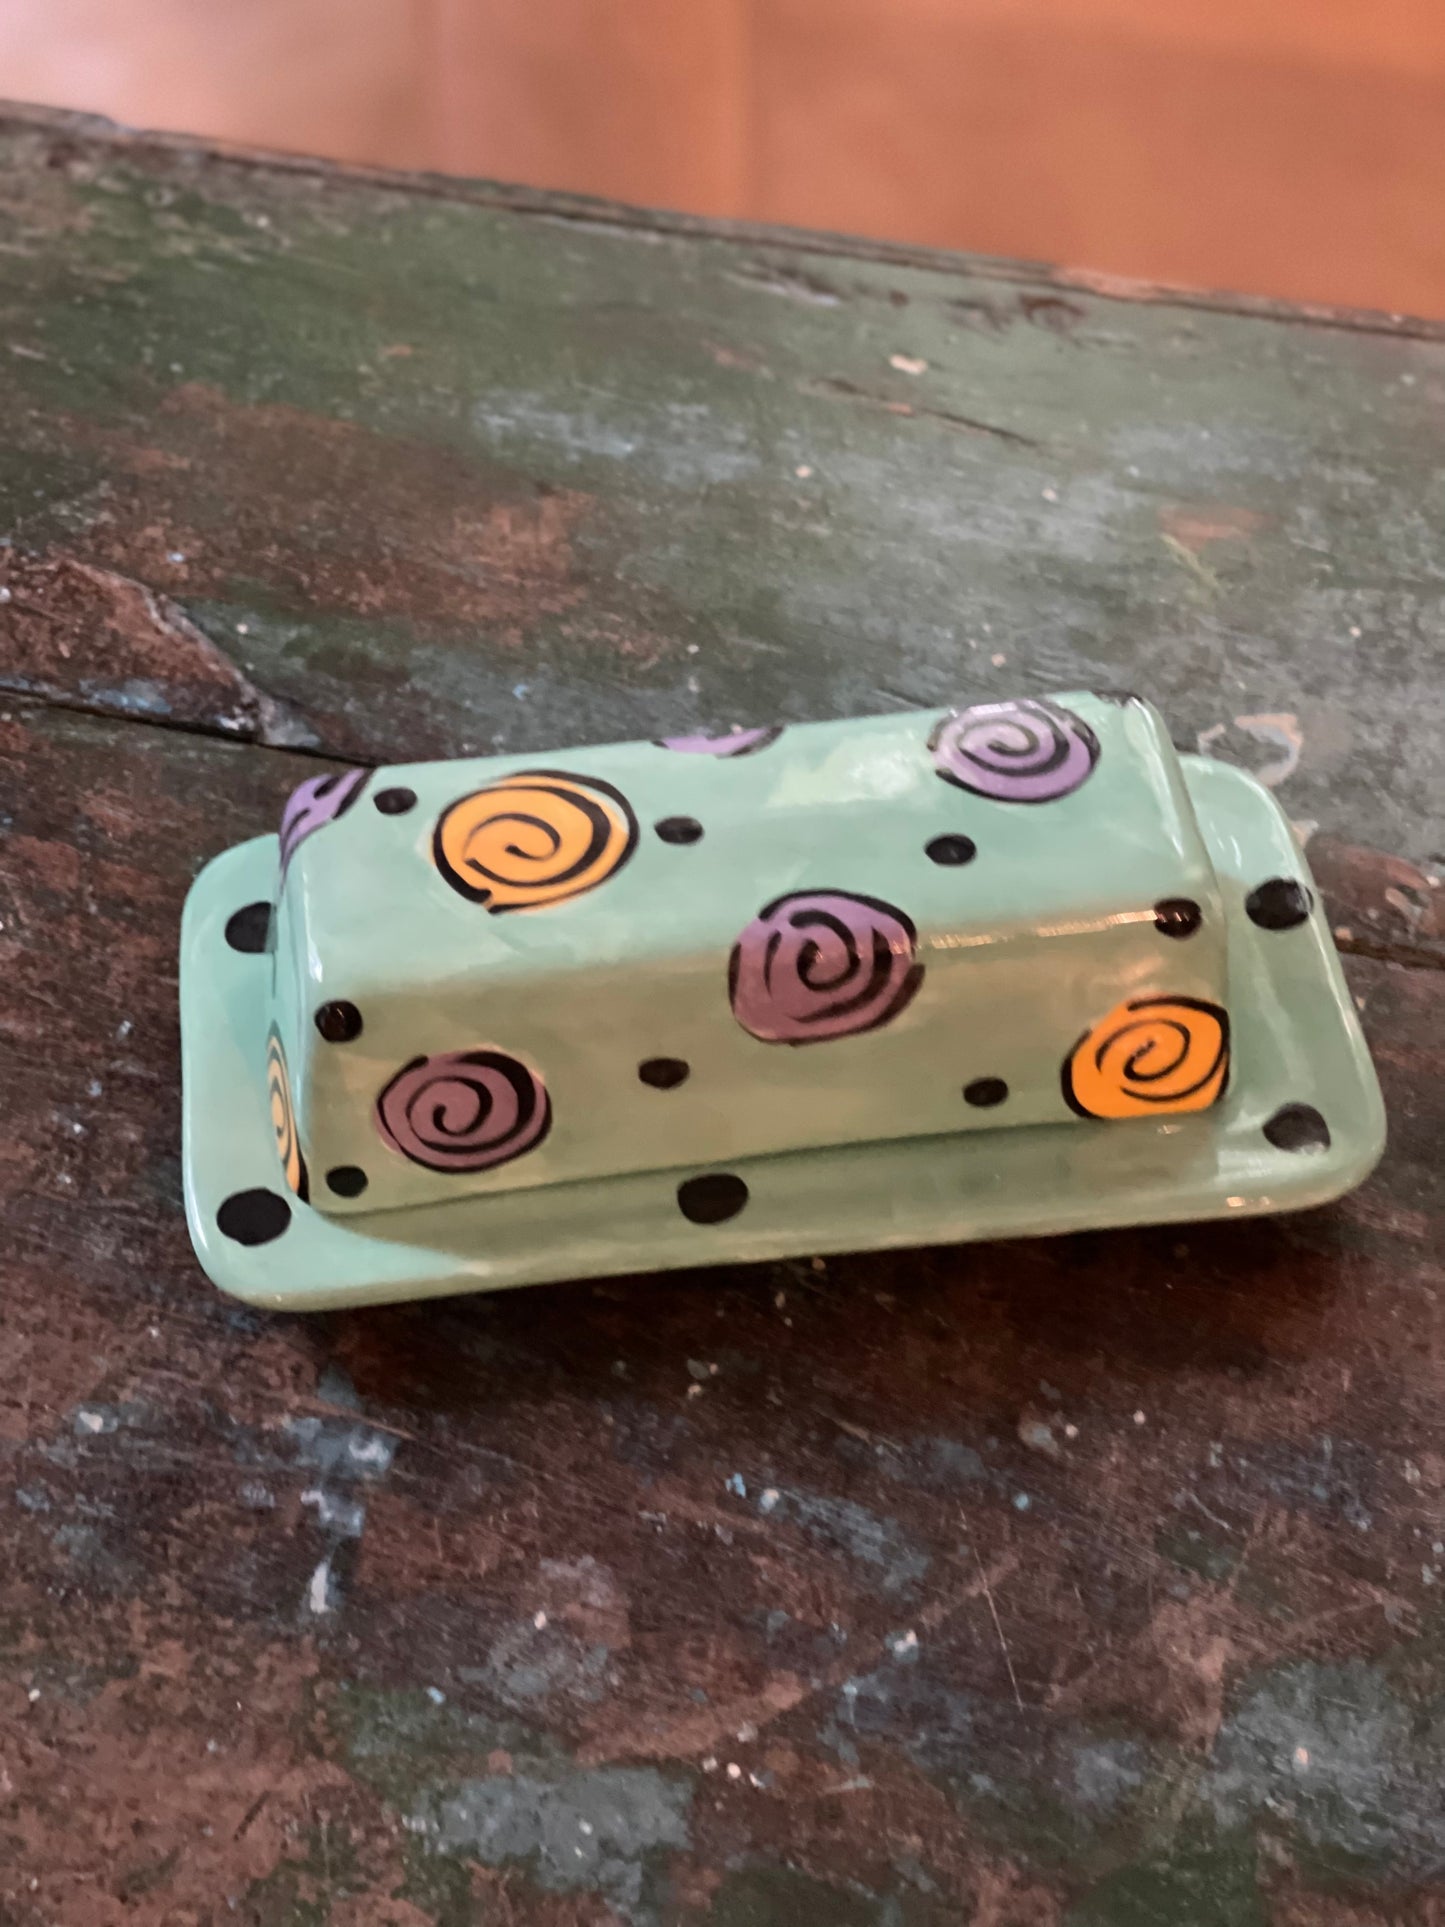 Purple whimsical Butter Dish